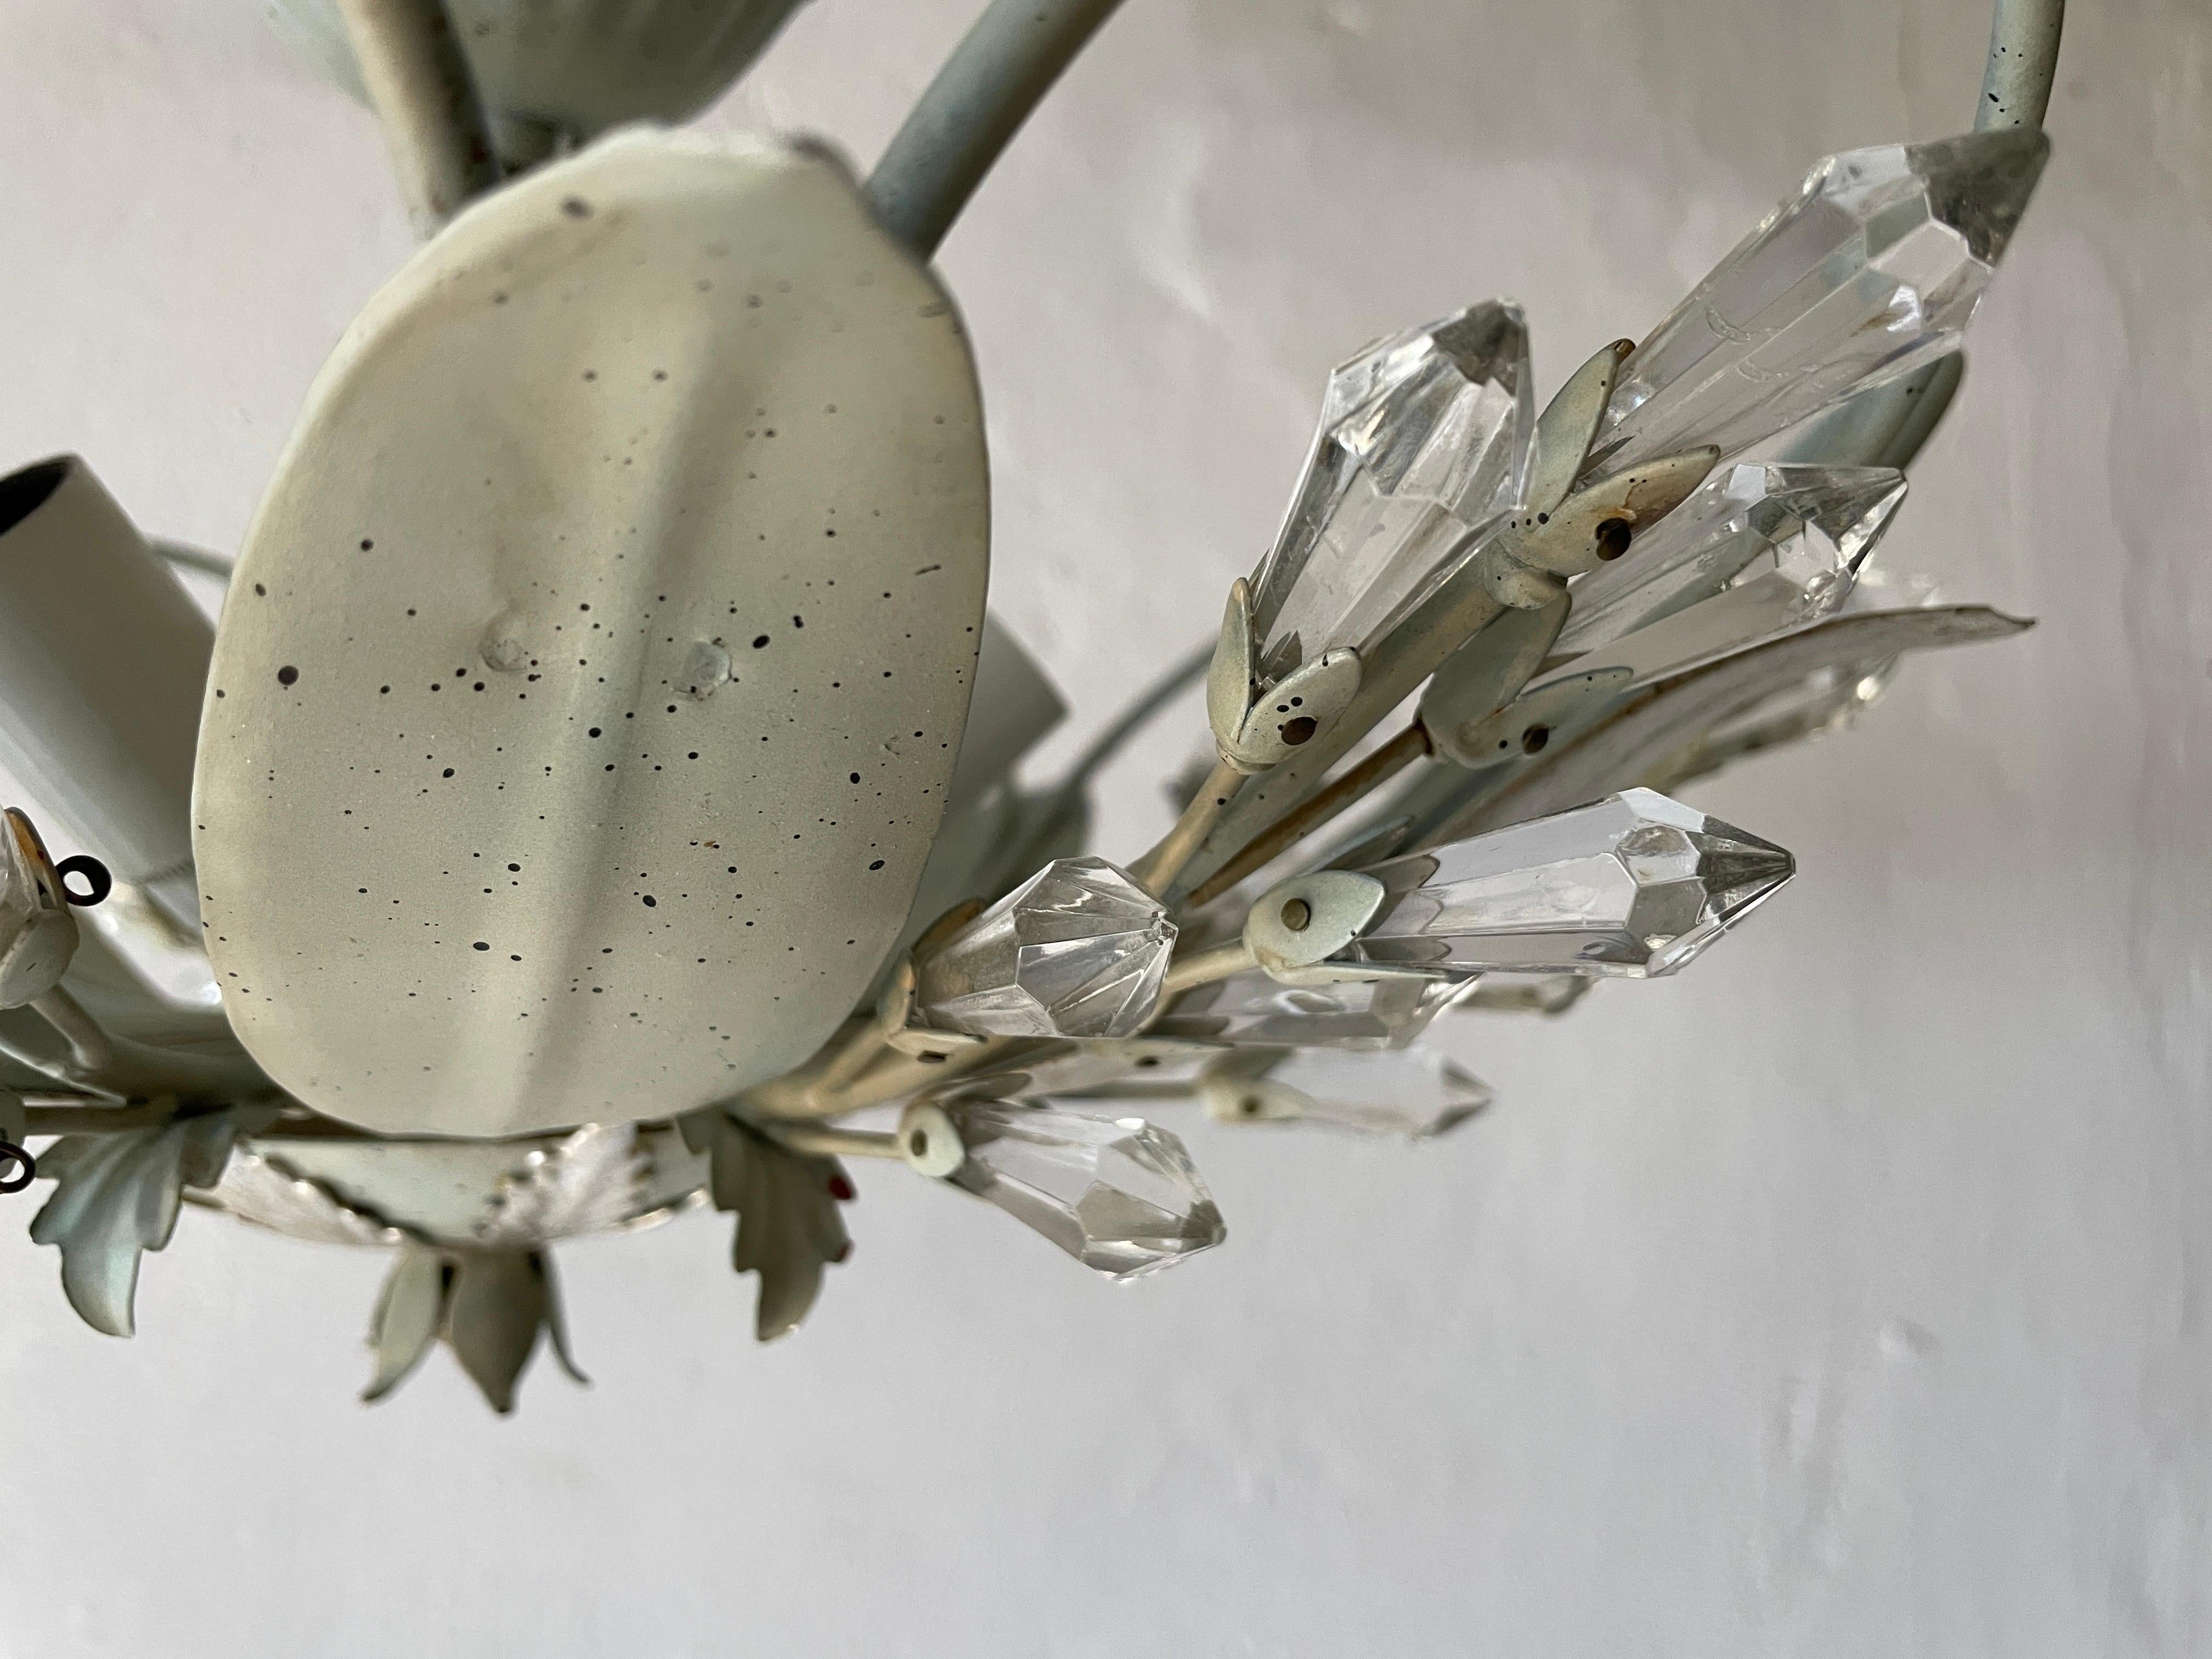 Metal Flower Design Ceiling Lamp with Glass Ornaments, 1950s, Germany For Sale